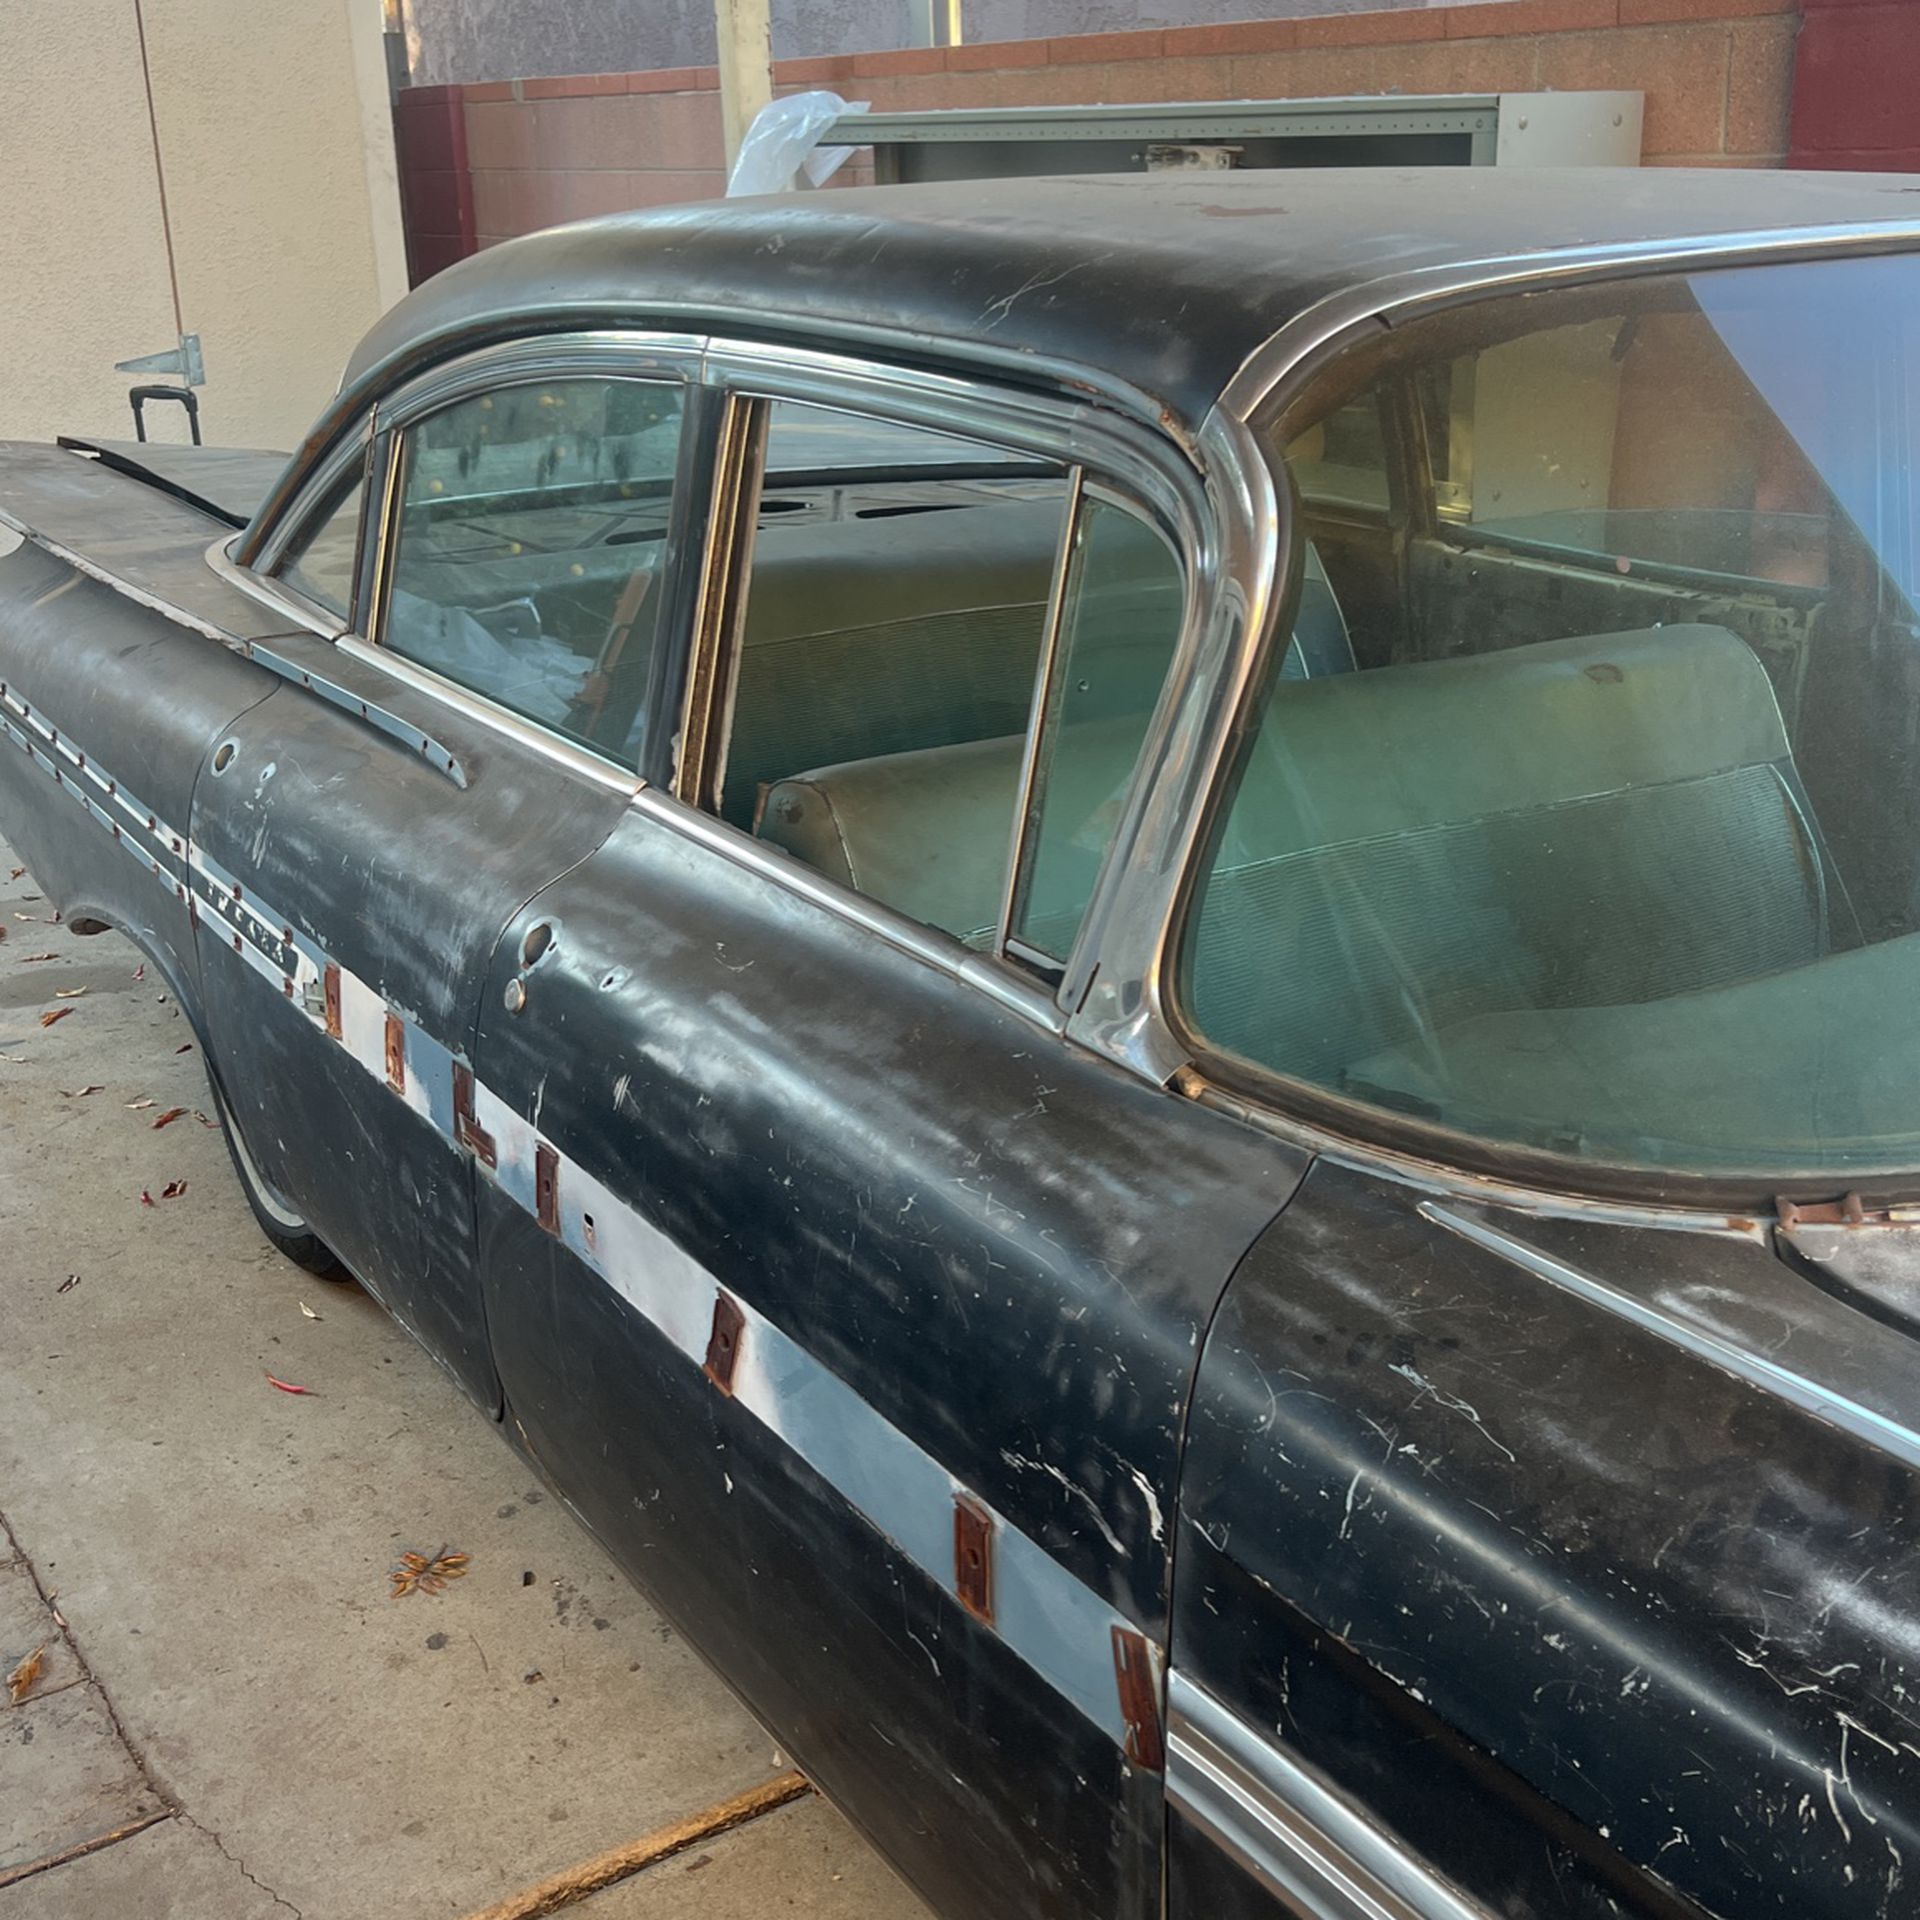 1959 chevy impala for Sale in Downey, CA - OfferUp